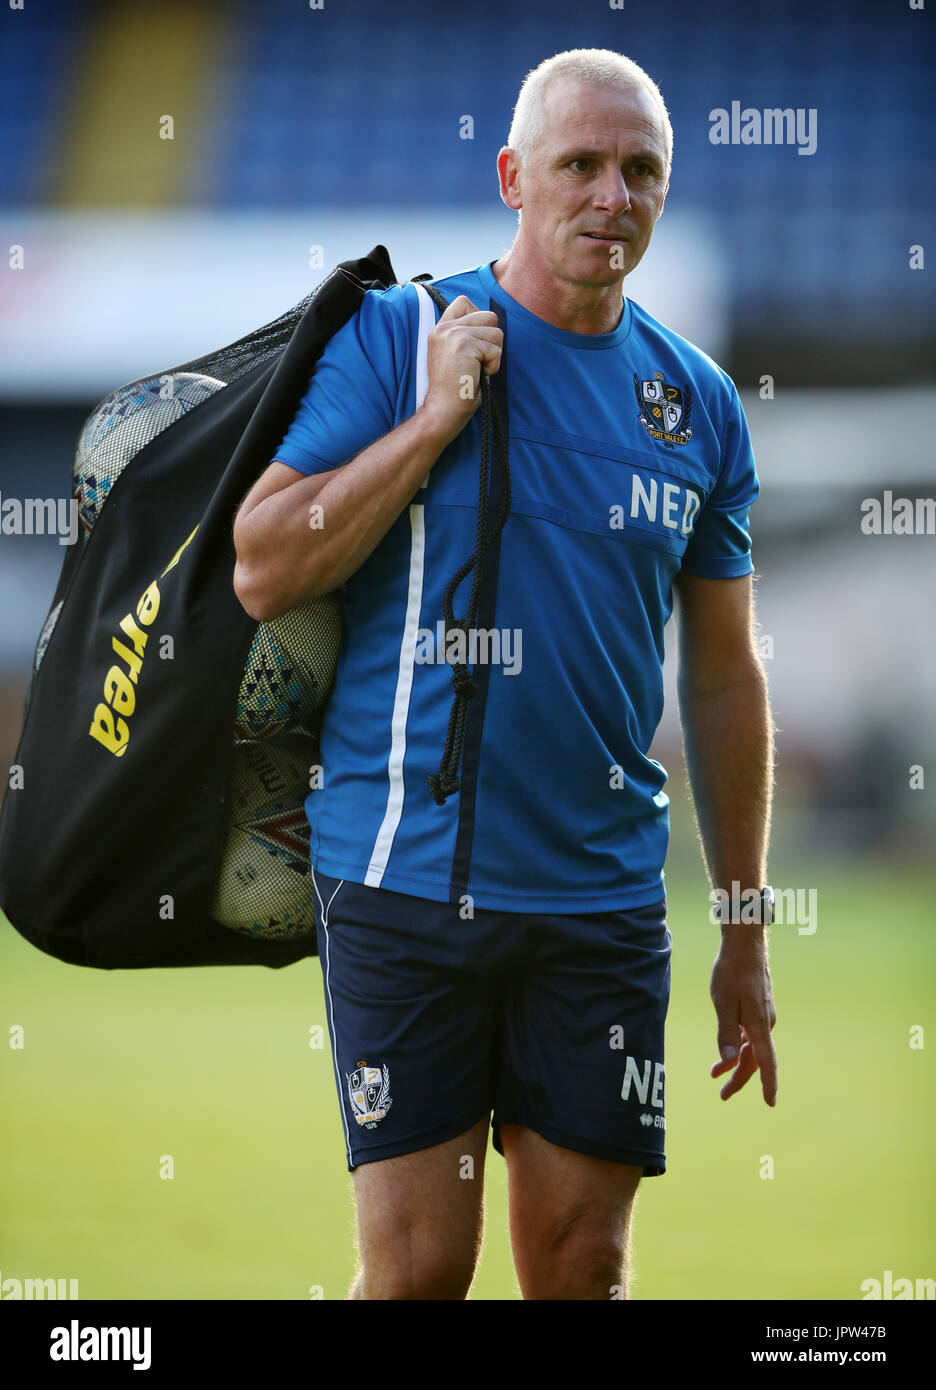 Port Vale coach David Kelly during the pre-season friendly match at Vale  Park, Stoke. PRESS ASSOCIATION Photo. Picture date: Tuesday August 1, 2017.  See PA story SOCCER Port Vale. Photo credit should